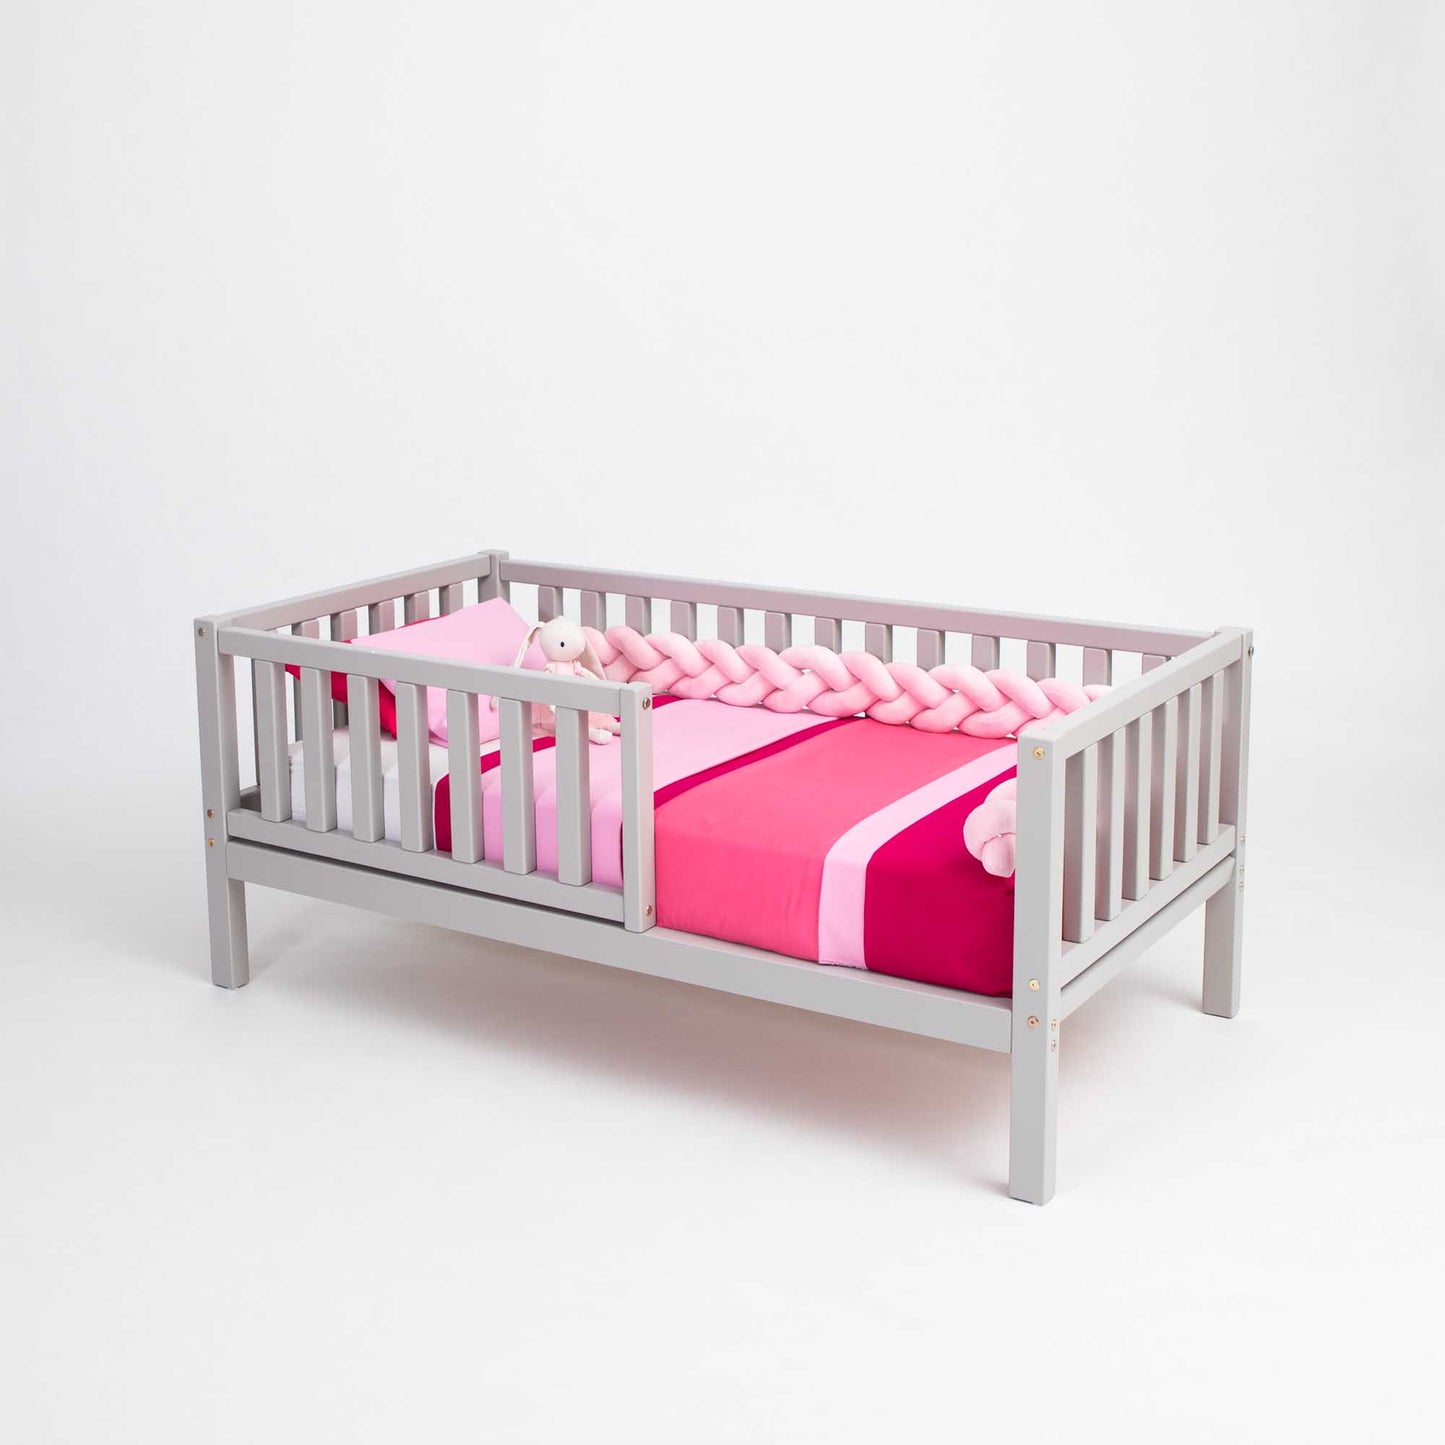 A 2-in-1 Toddler Bed on Legs with a Vertical Rail Fence by Sweet Home From Wood, and Pink and Grey Blanket.